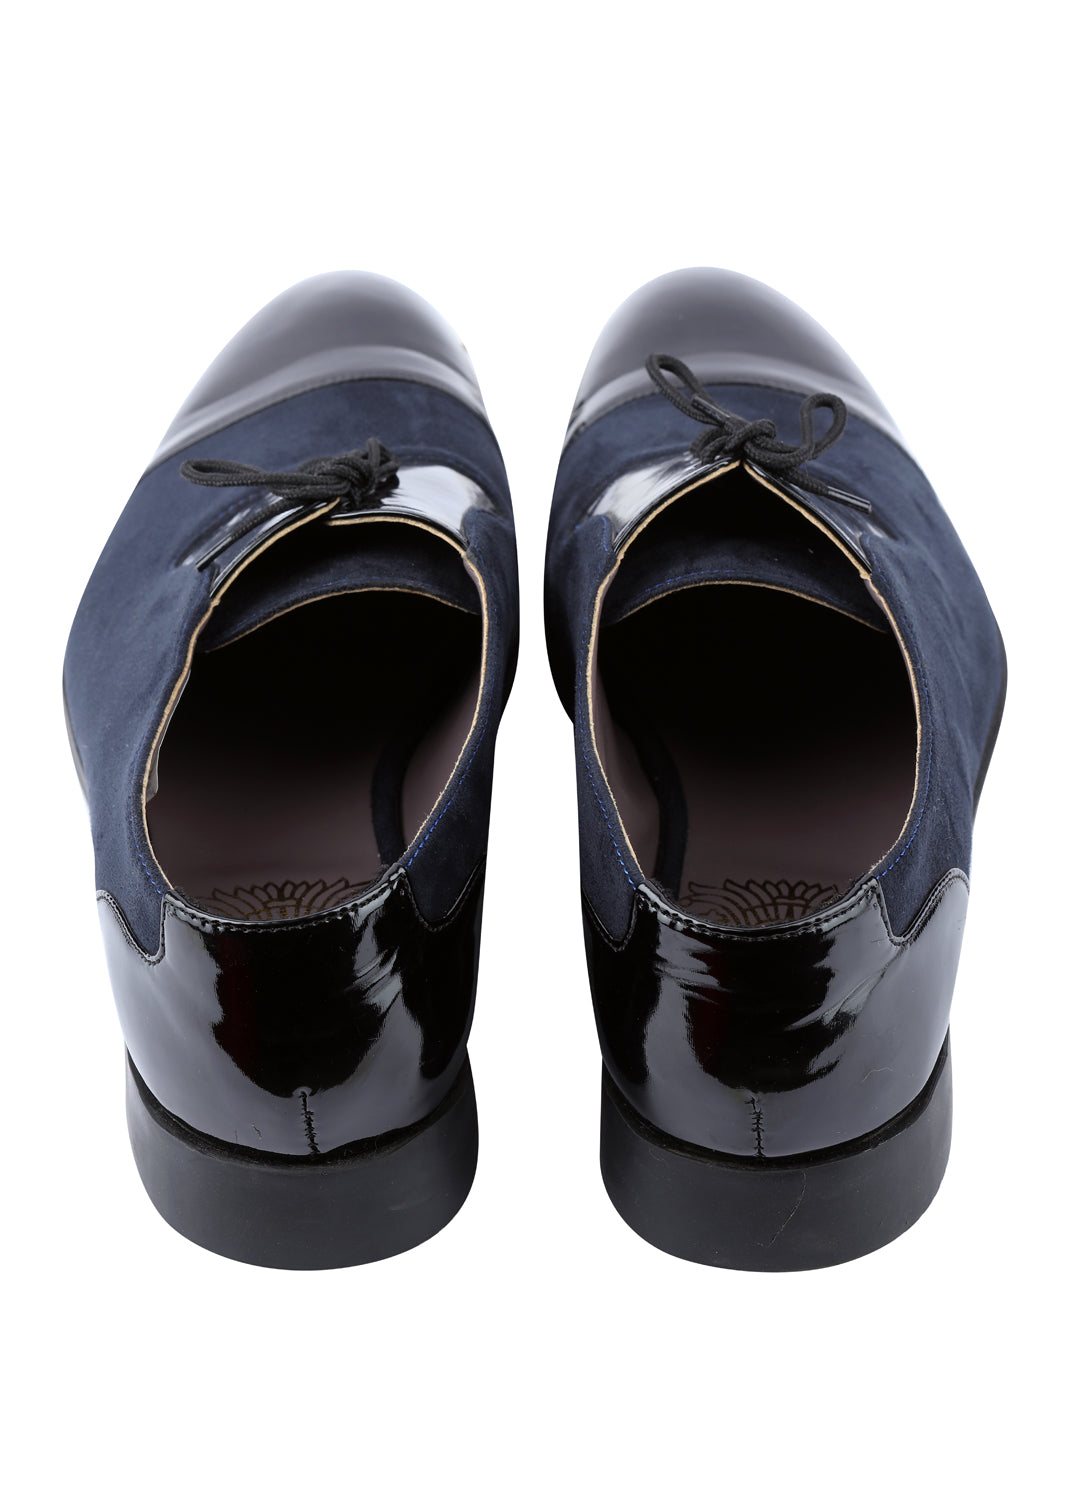 Navy Handcrafted Semi-Leather Shoes